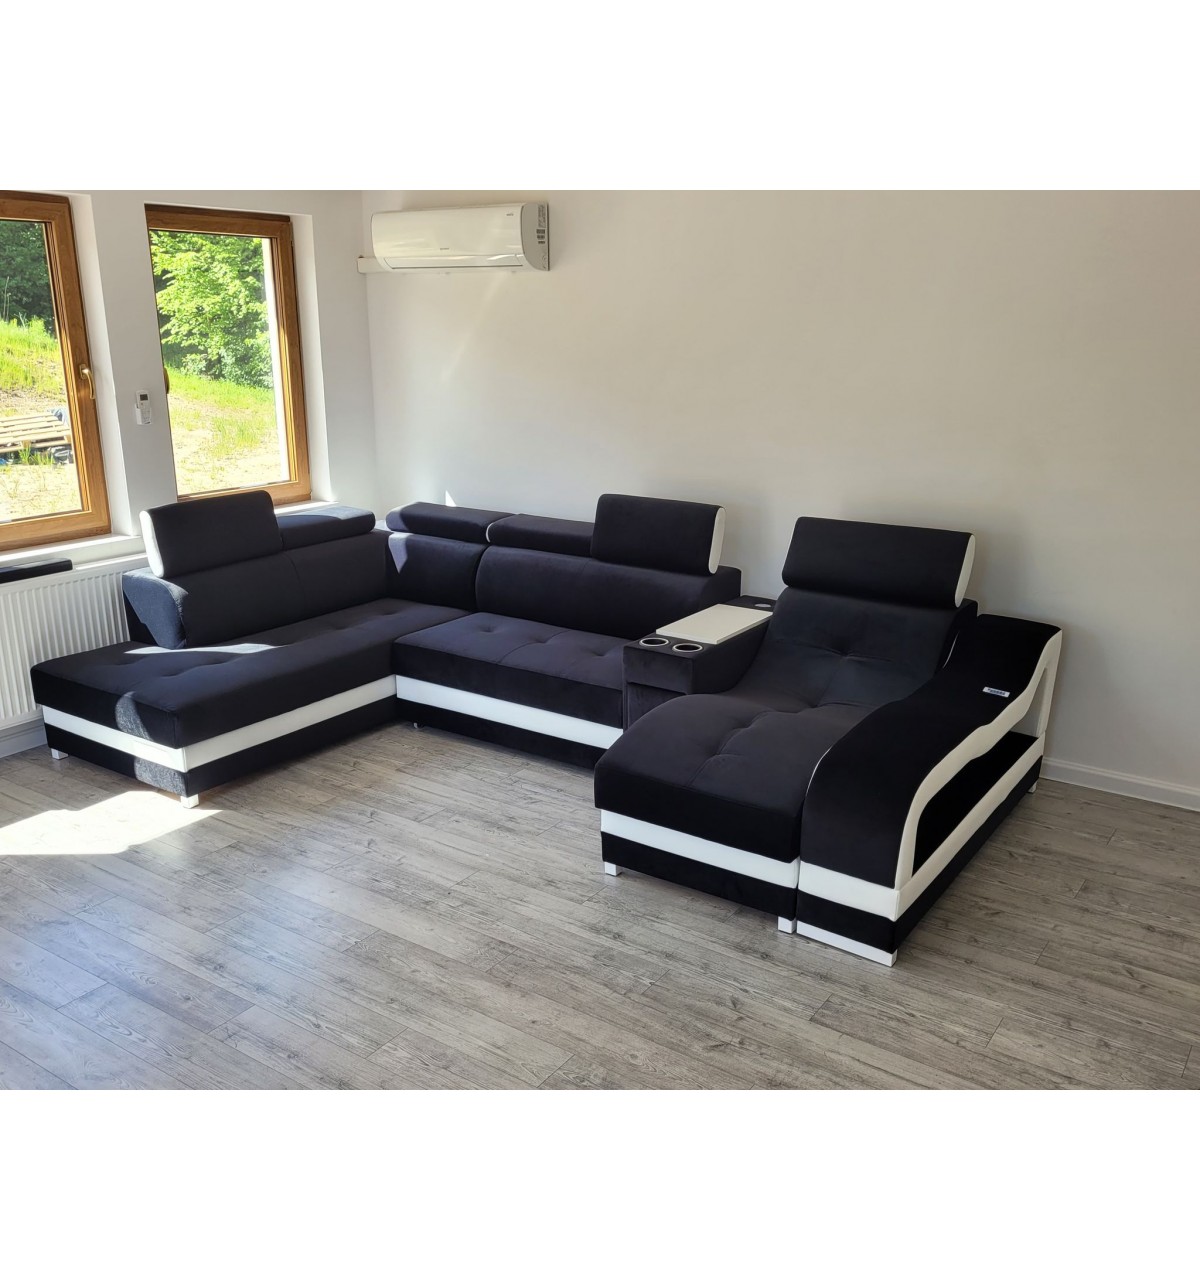 This is a high-class corner sofa with a very elegant and modern design